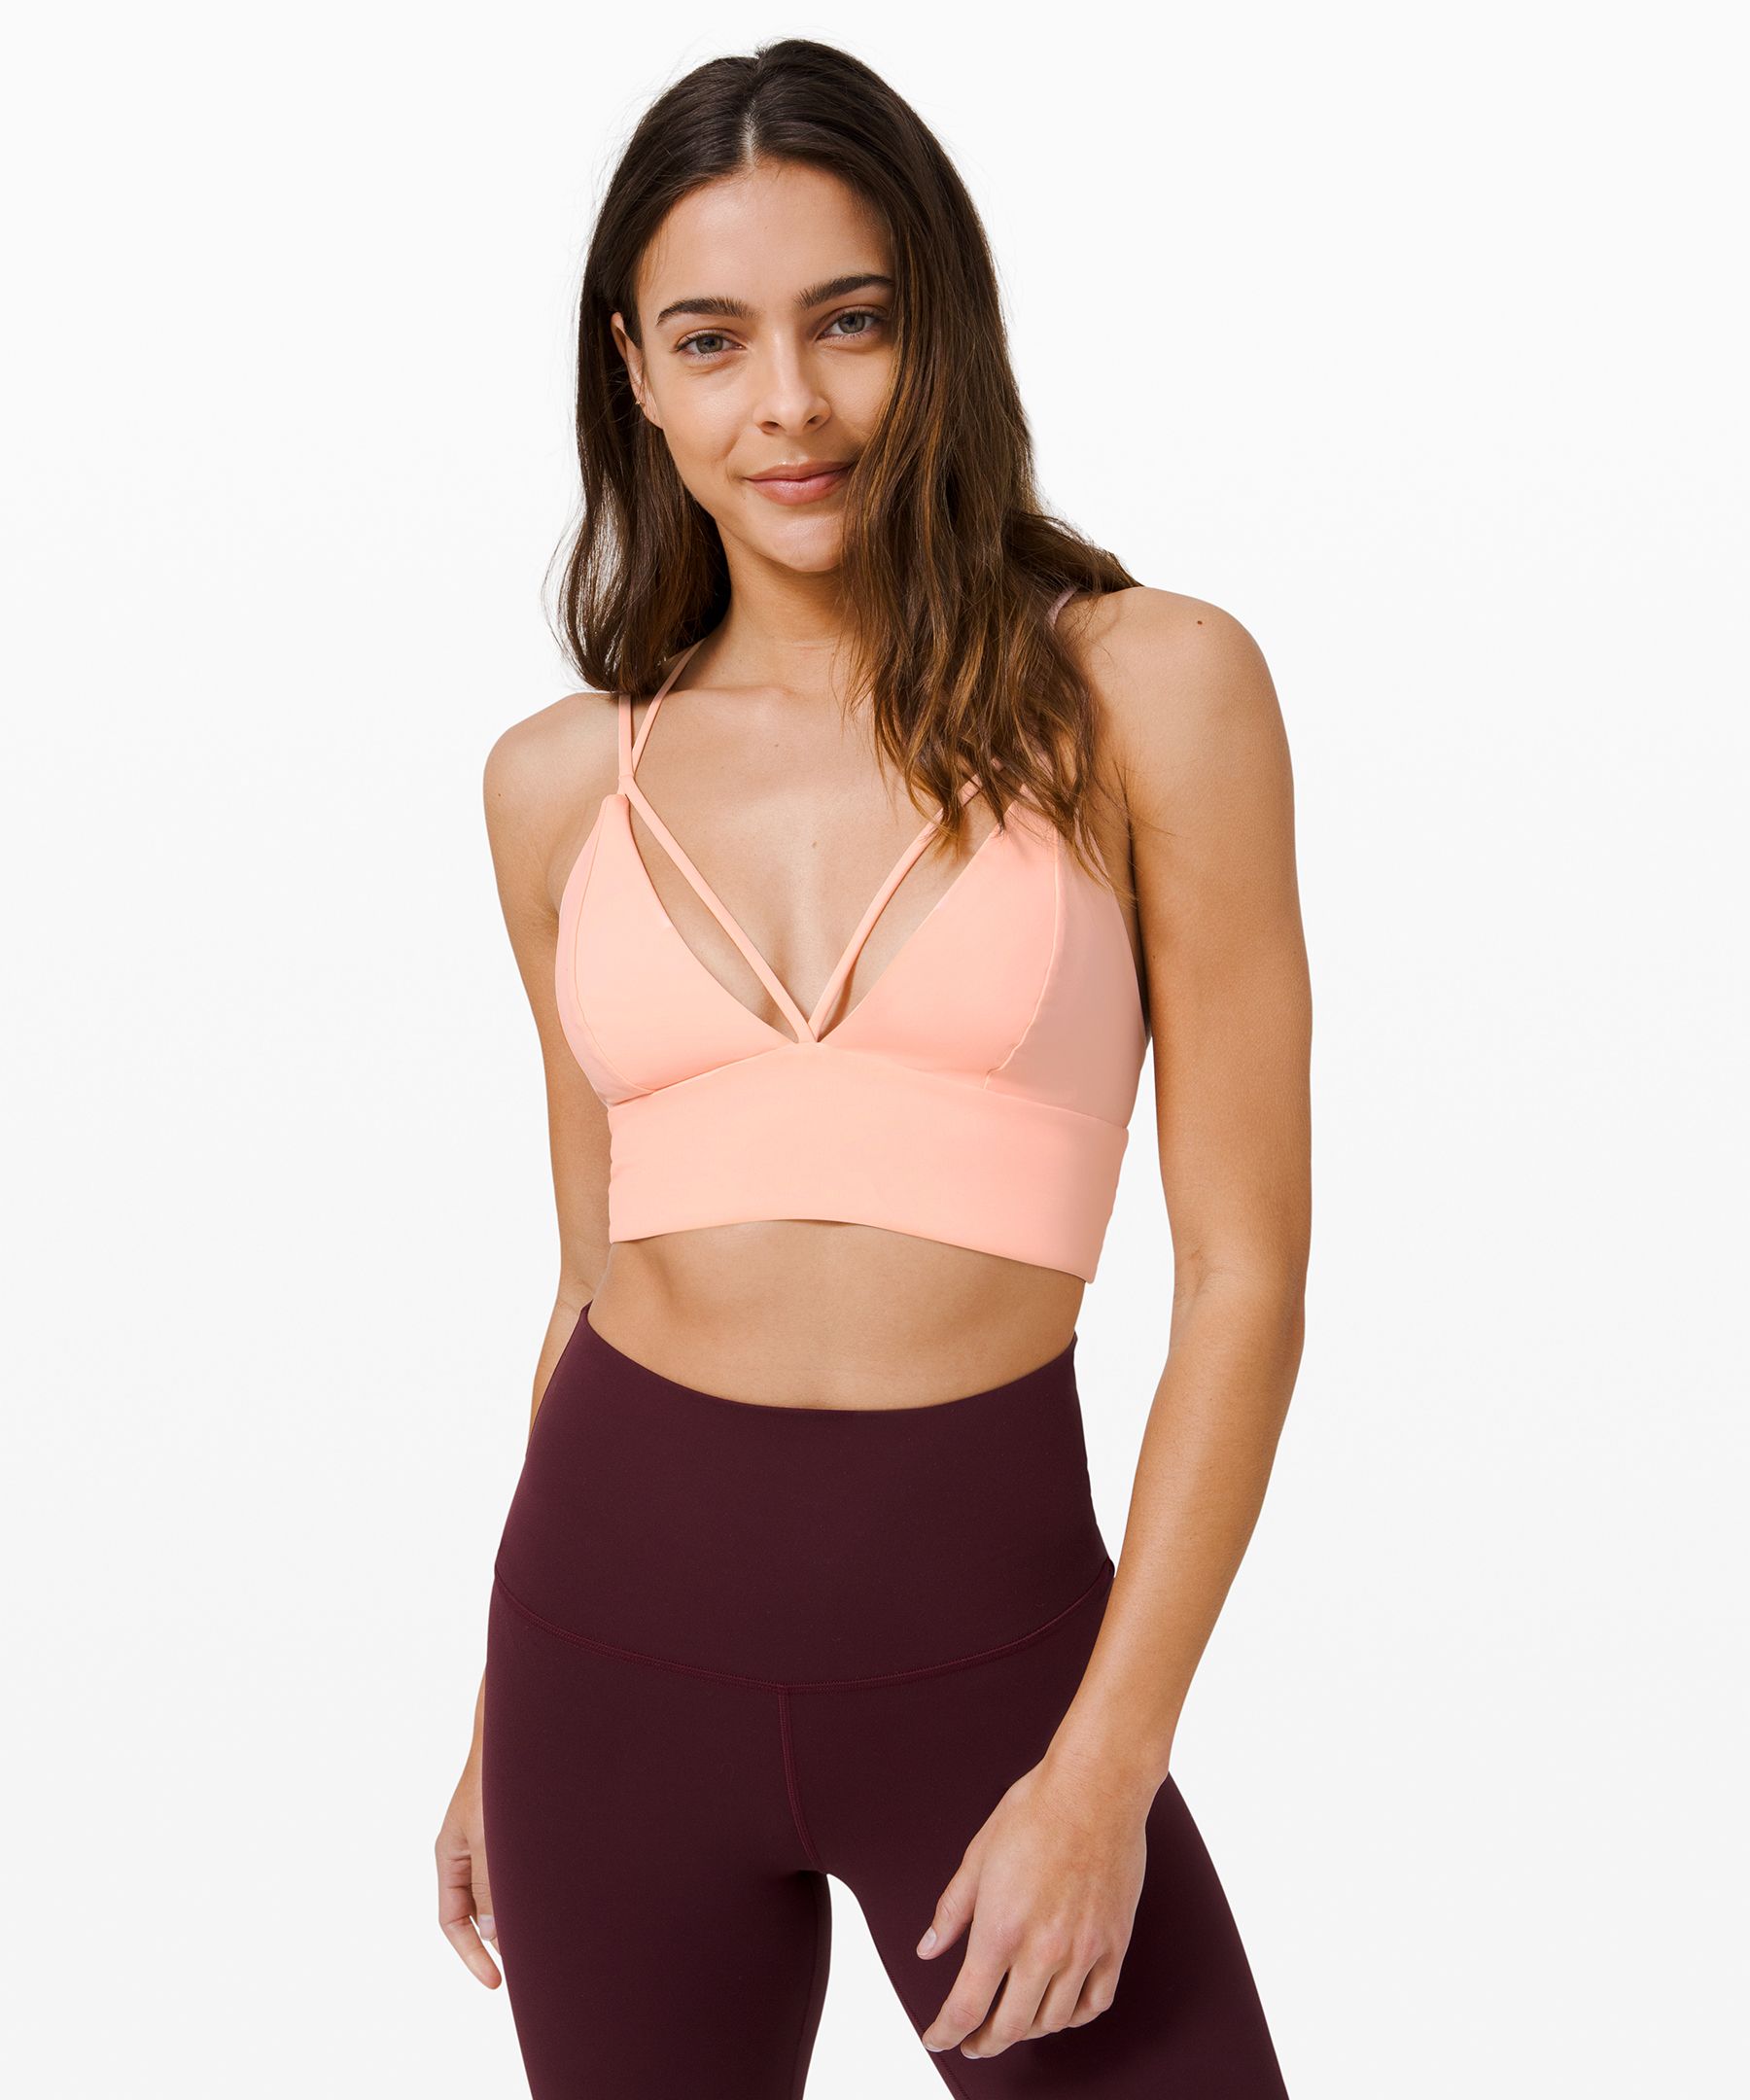 Pushing Limits Bra *Light Support, A/B Cup